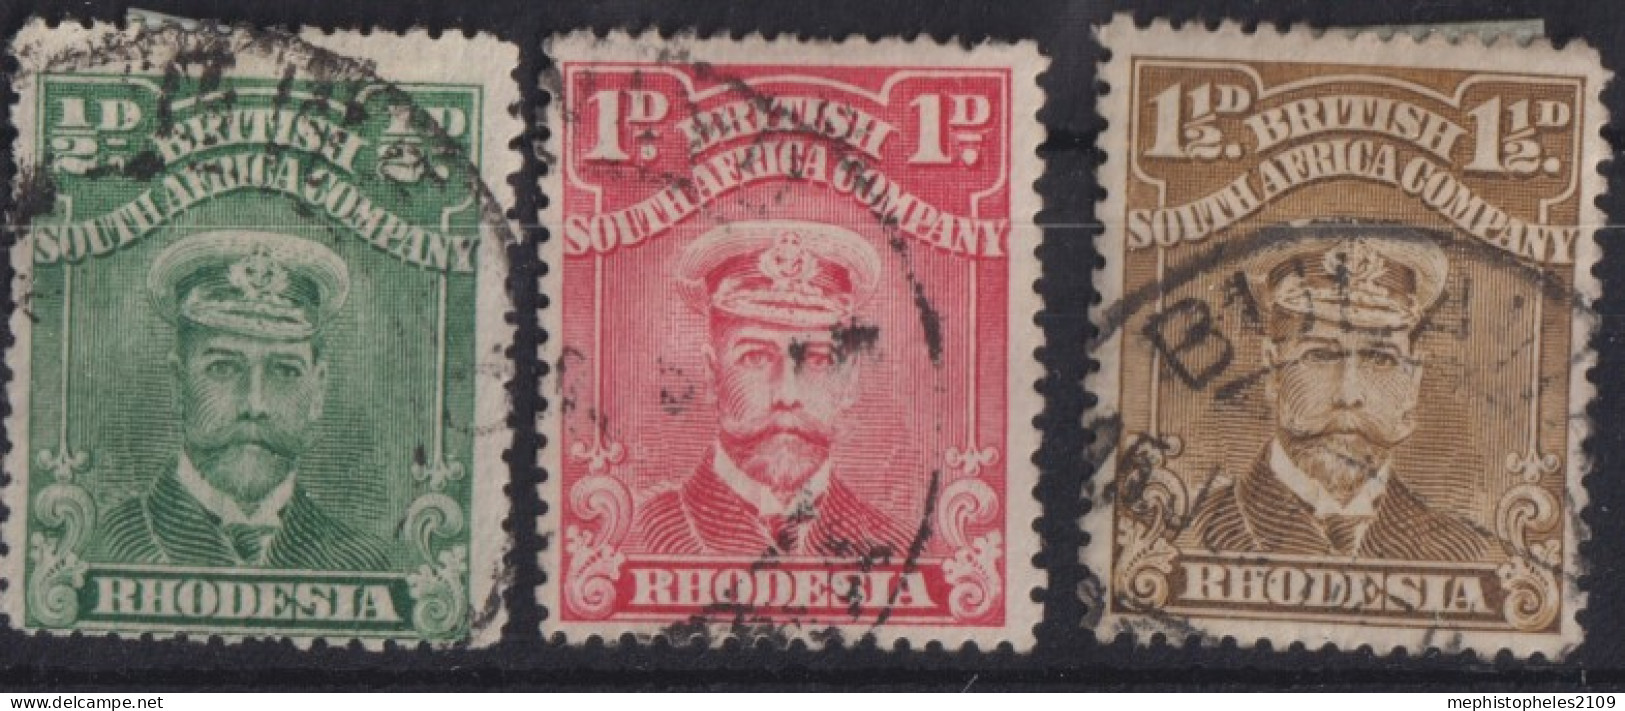 BRITISH SOUTH AFRICA COMPANY 1913 - Canceled - Sc# 119-121 - Unclassified